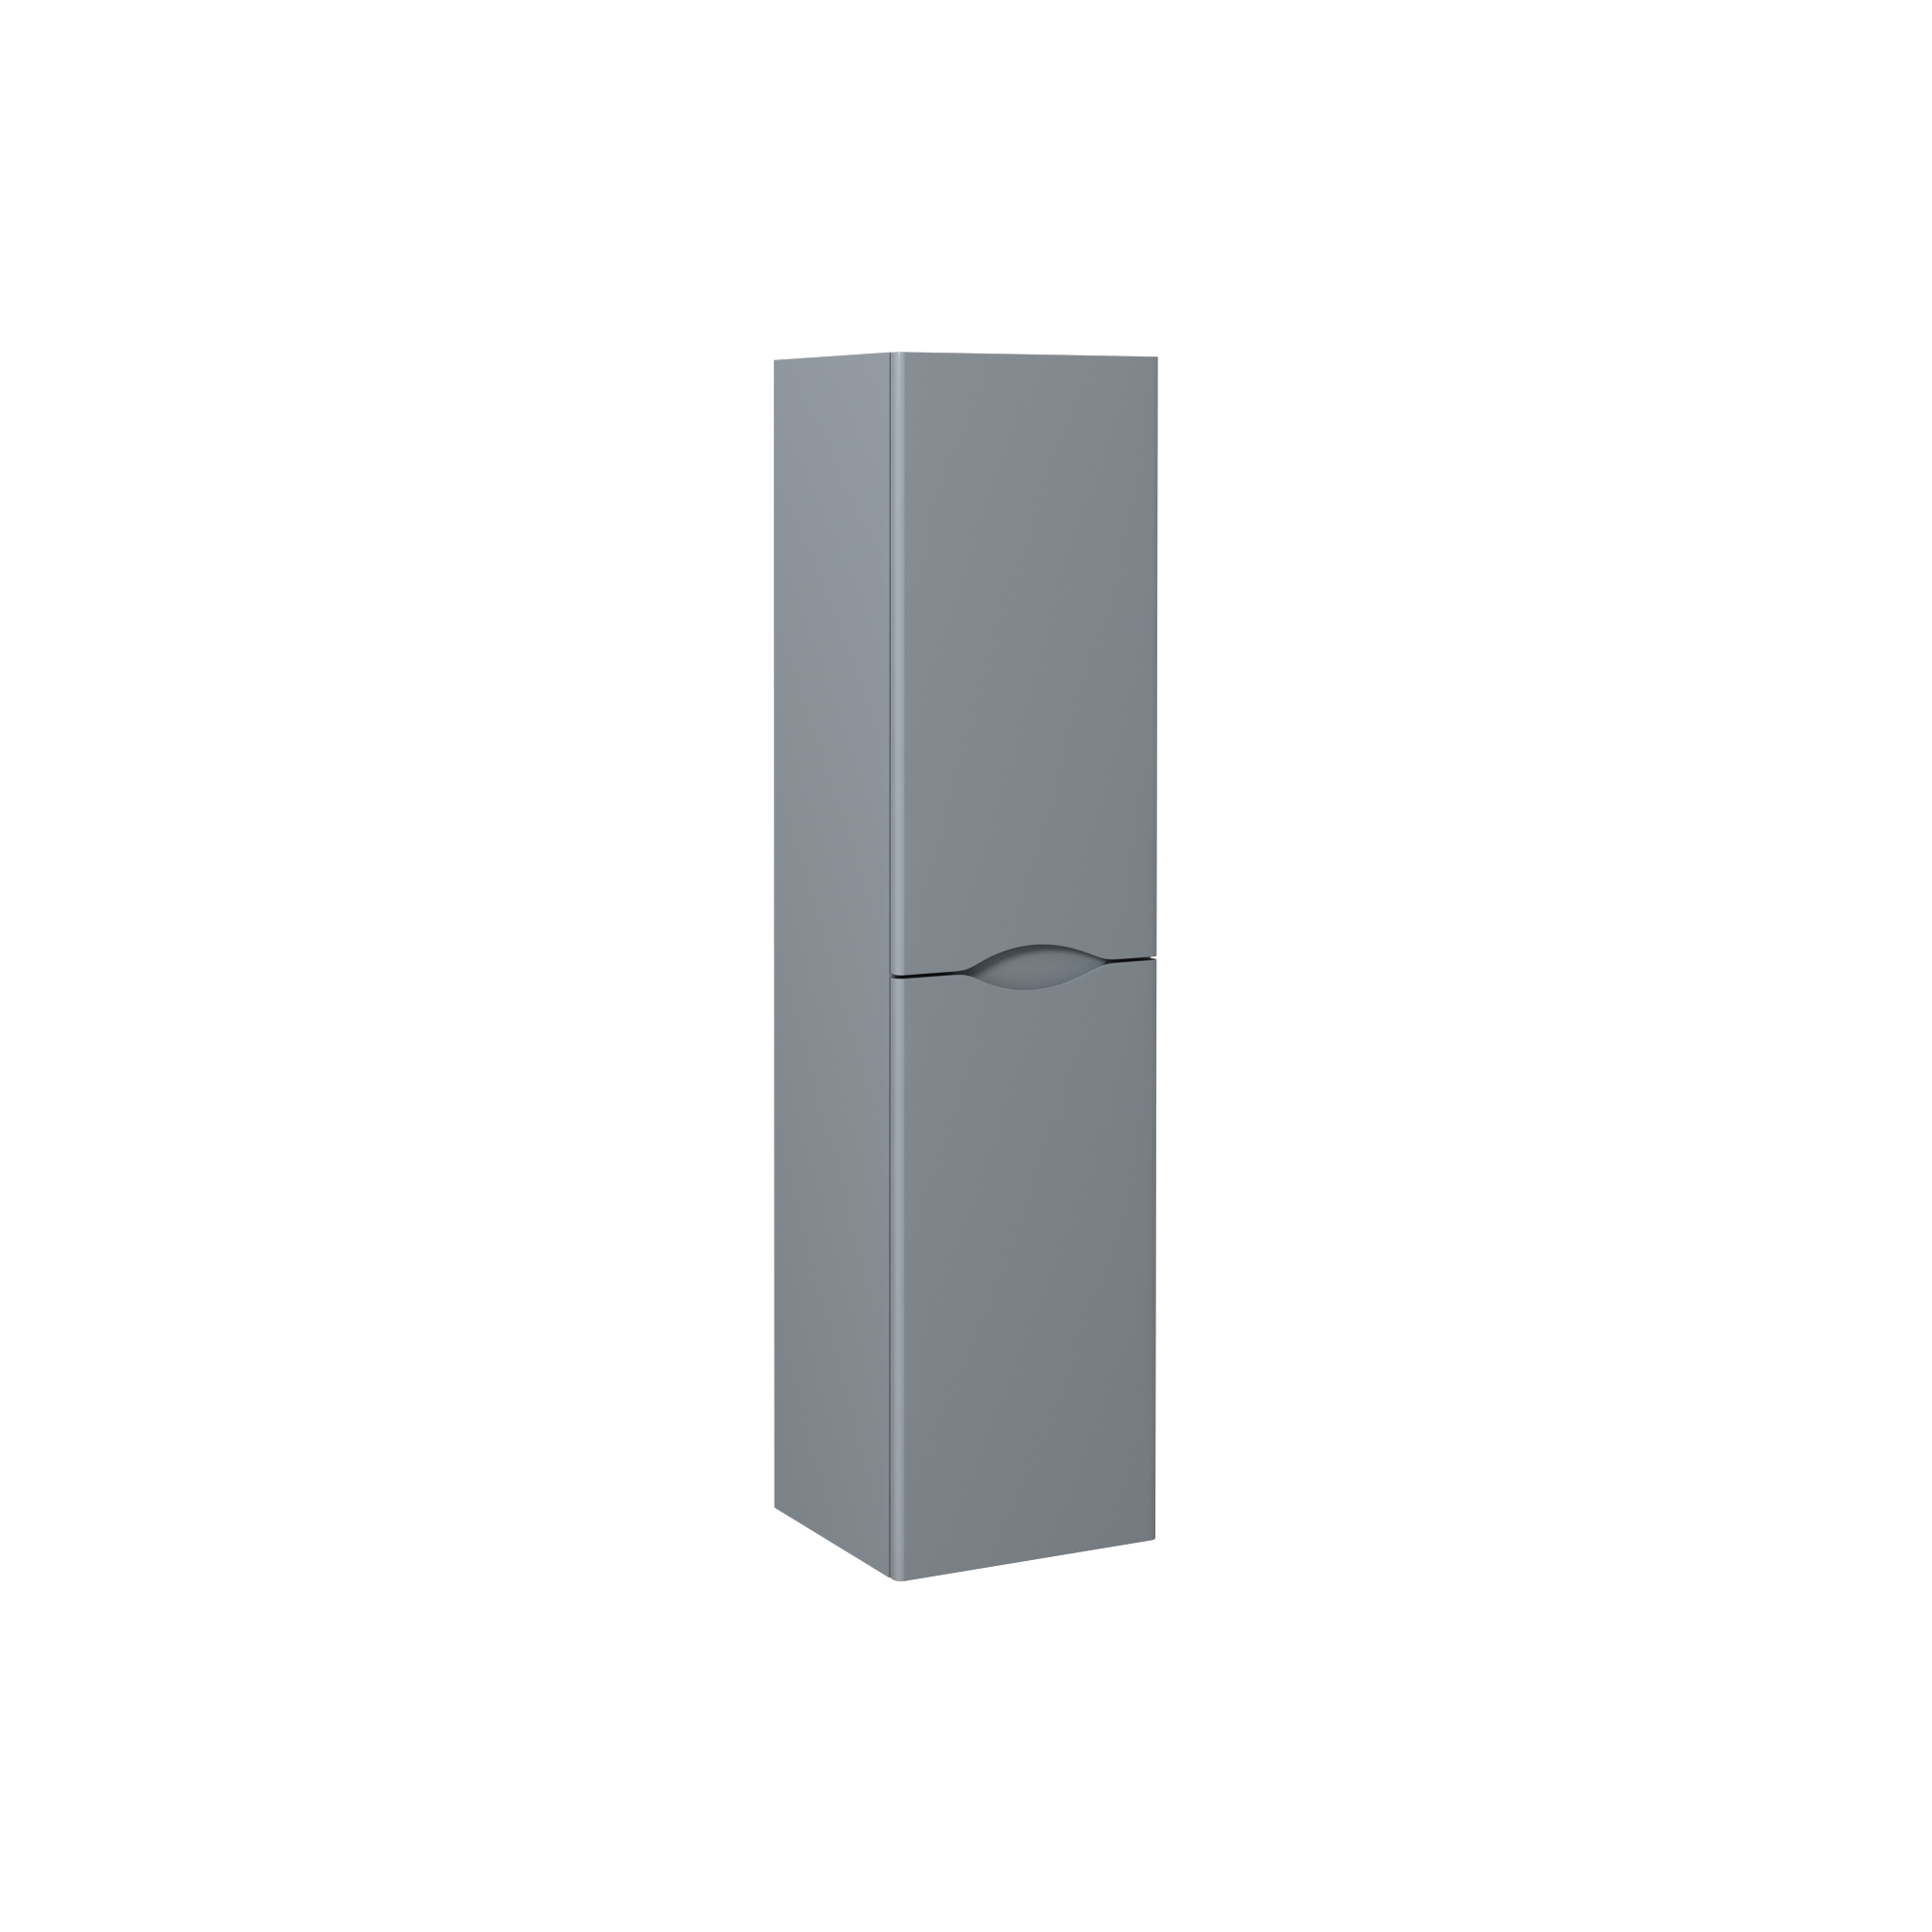 Neo 35 cm Tall Cabinet, Grey Left